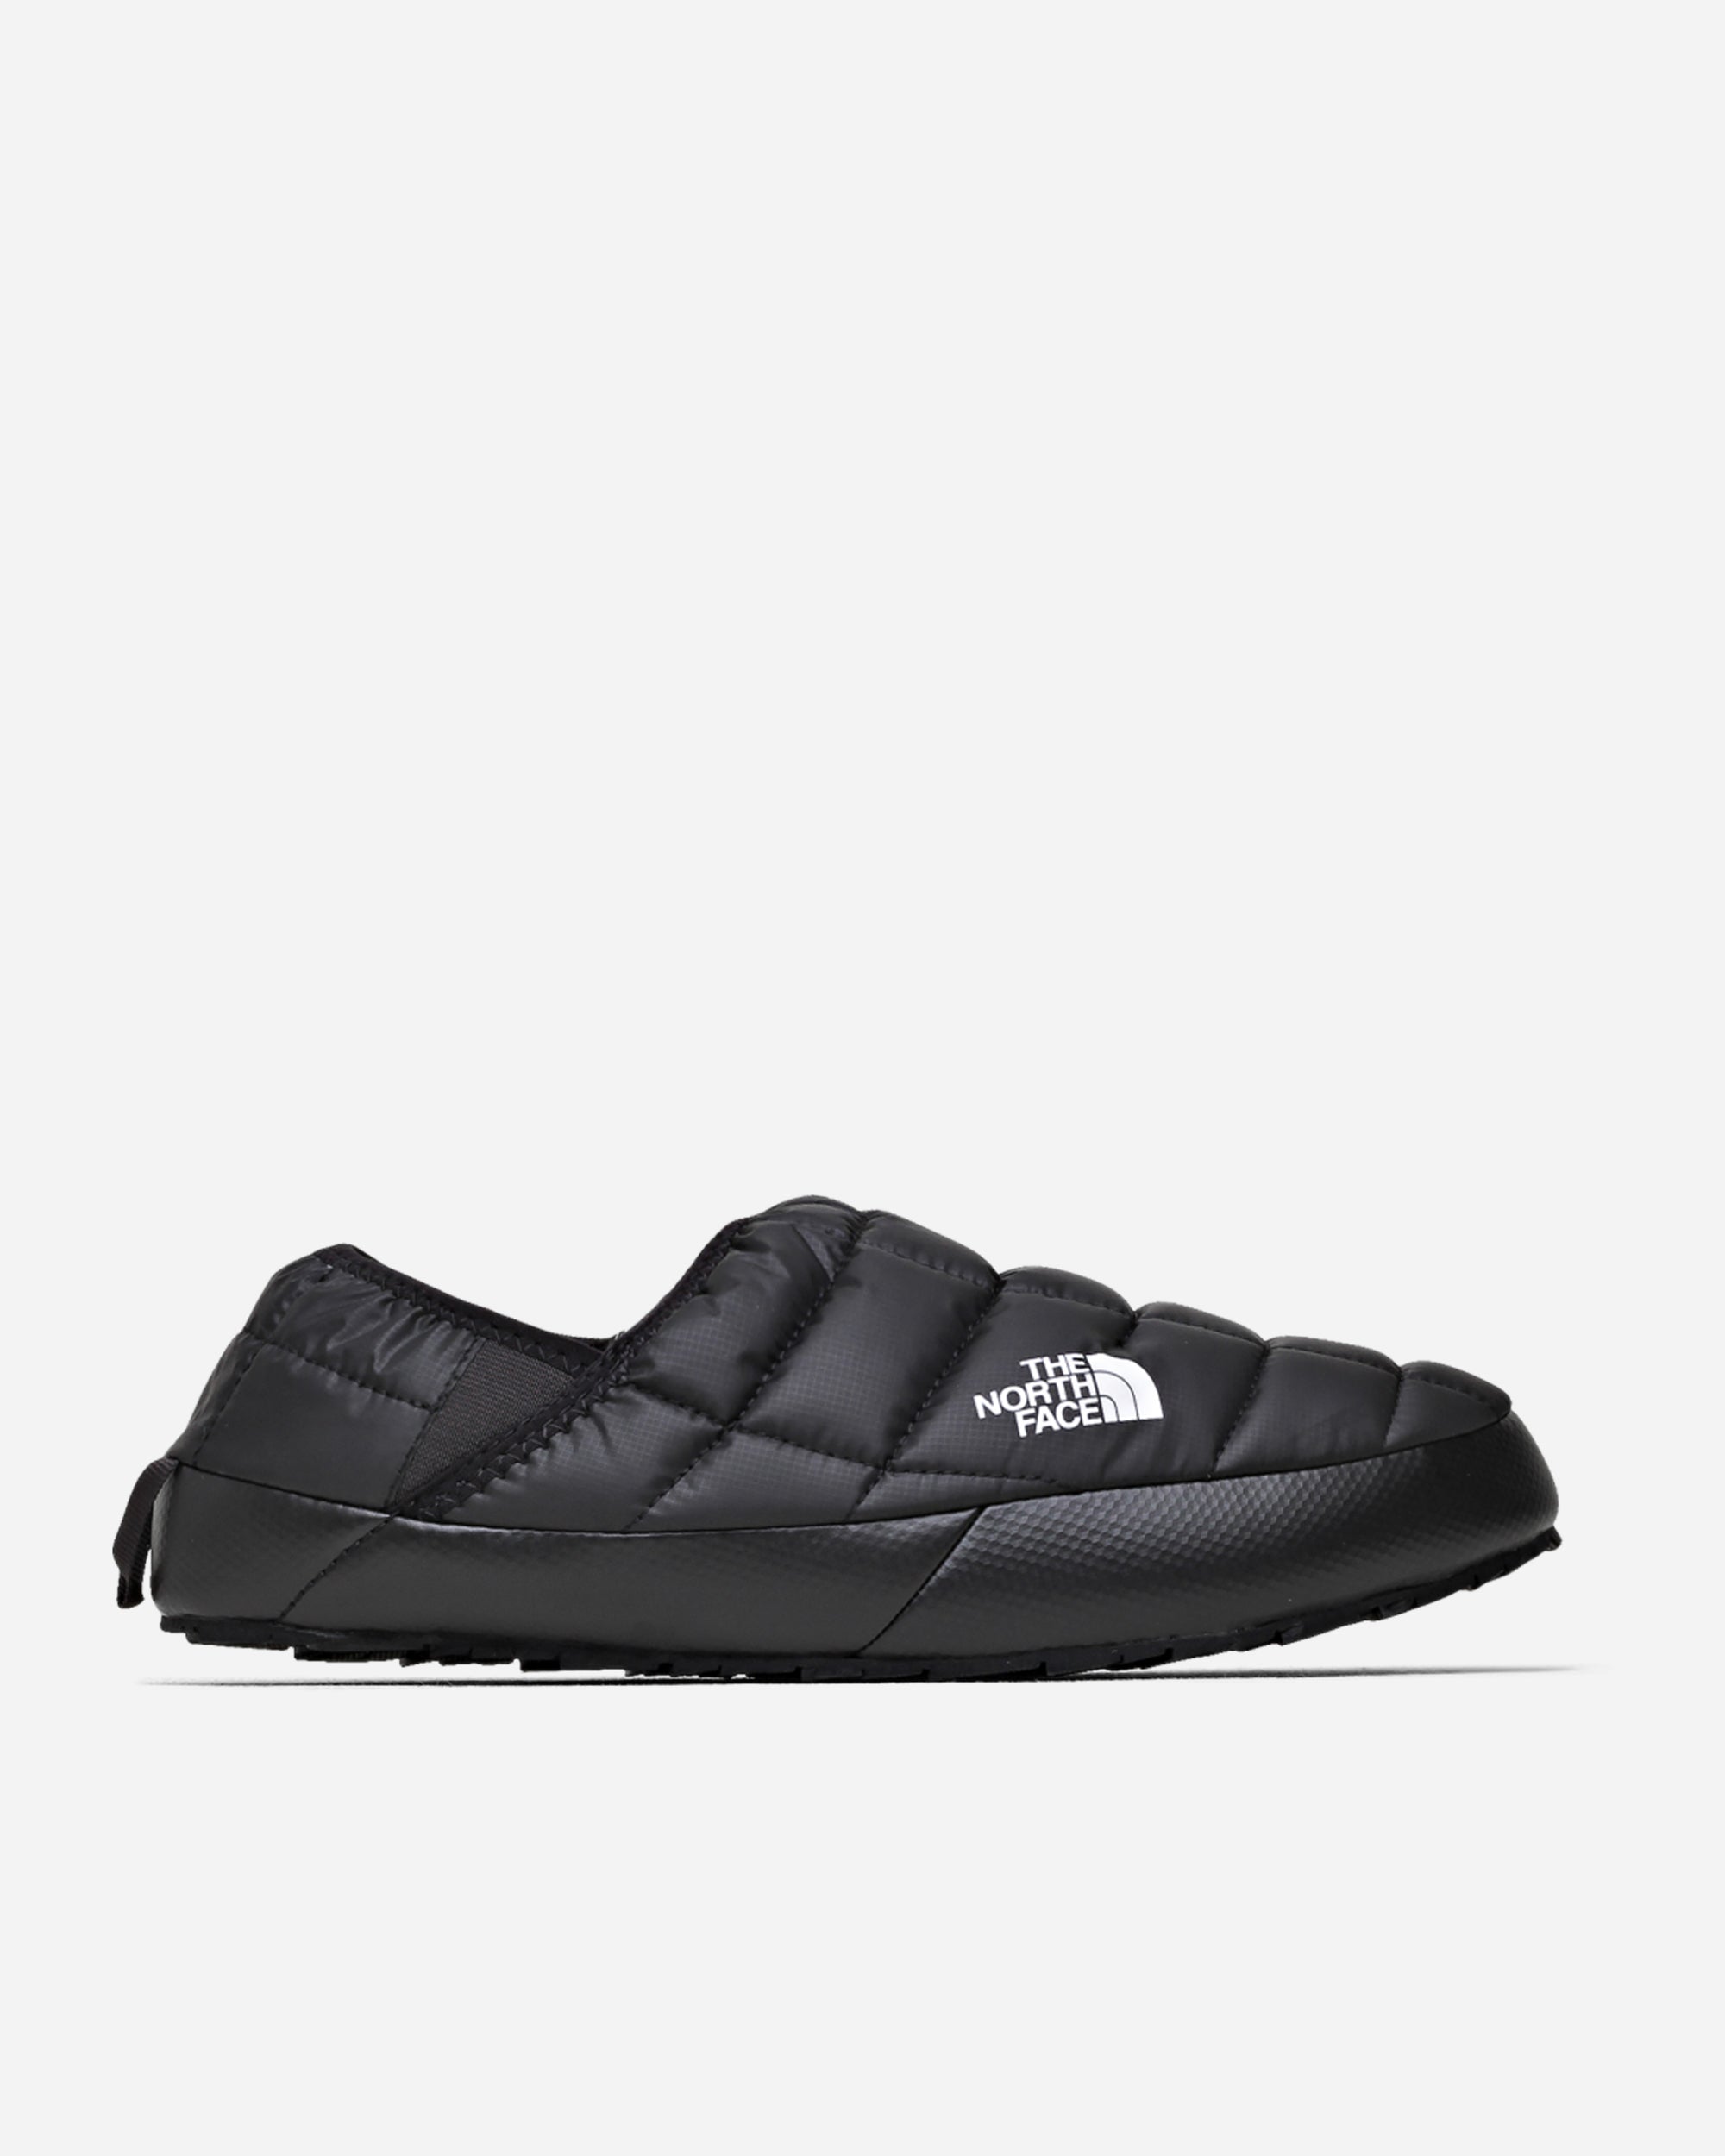 THE NORTH FACE Thermoball Traction Mule TNF BLACK NF0A3V1HKX71